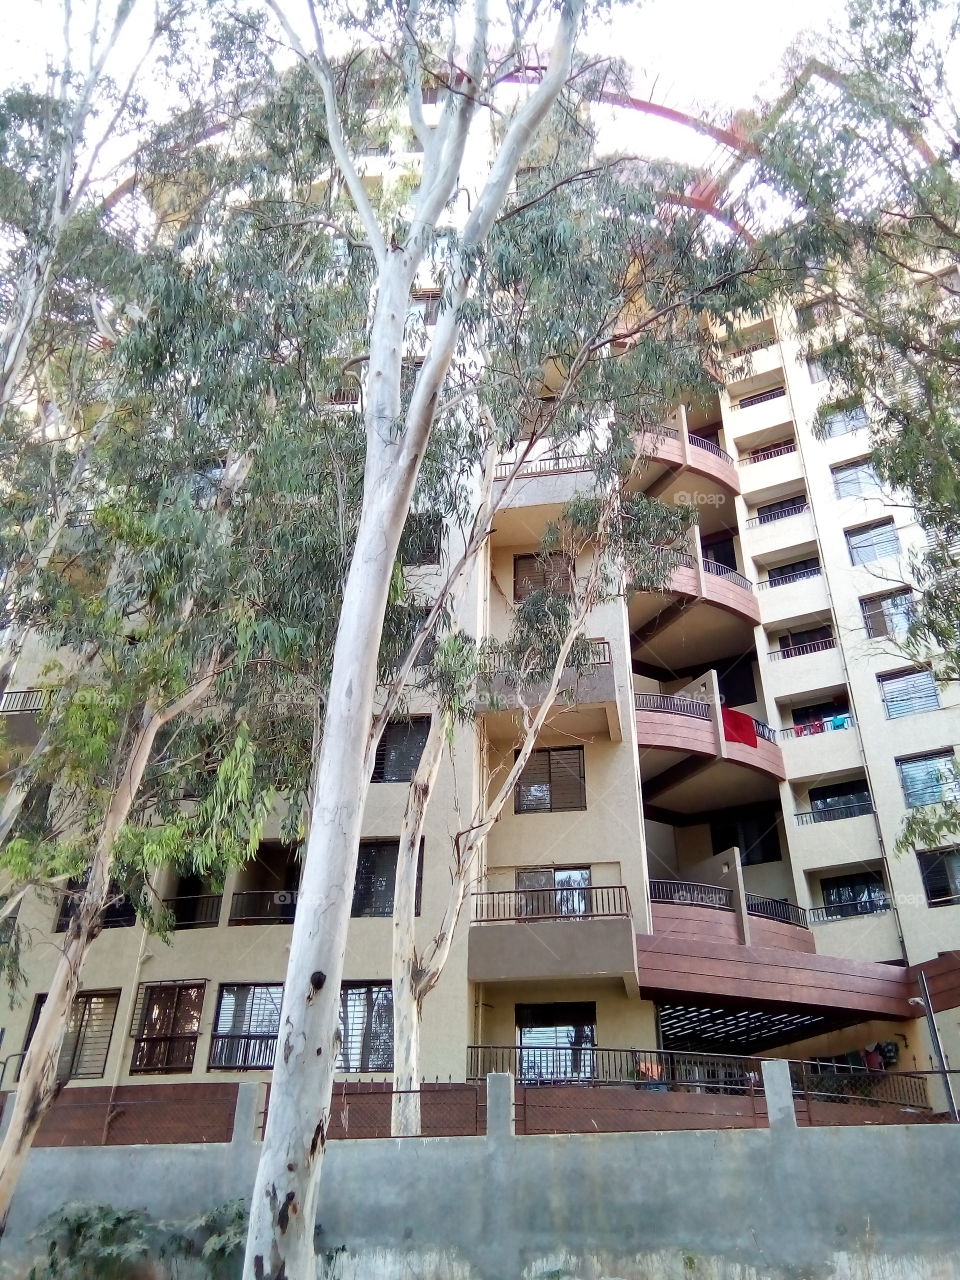 View of tree and building